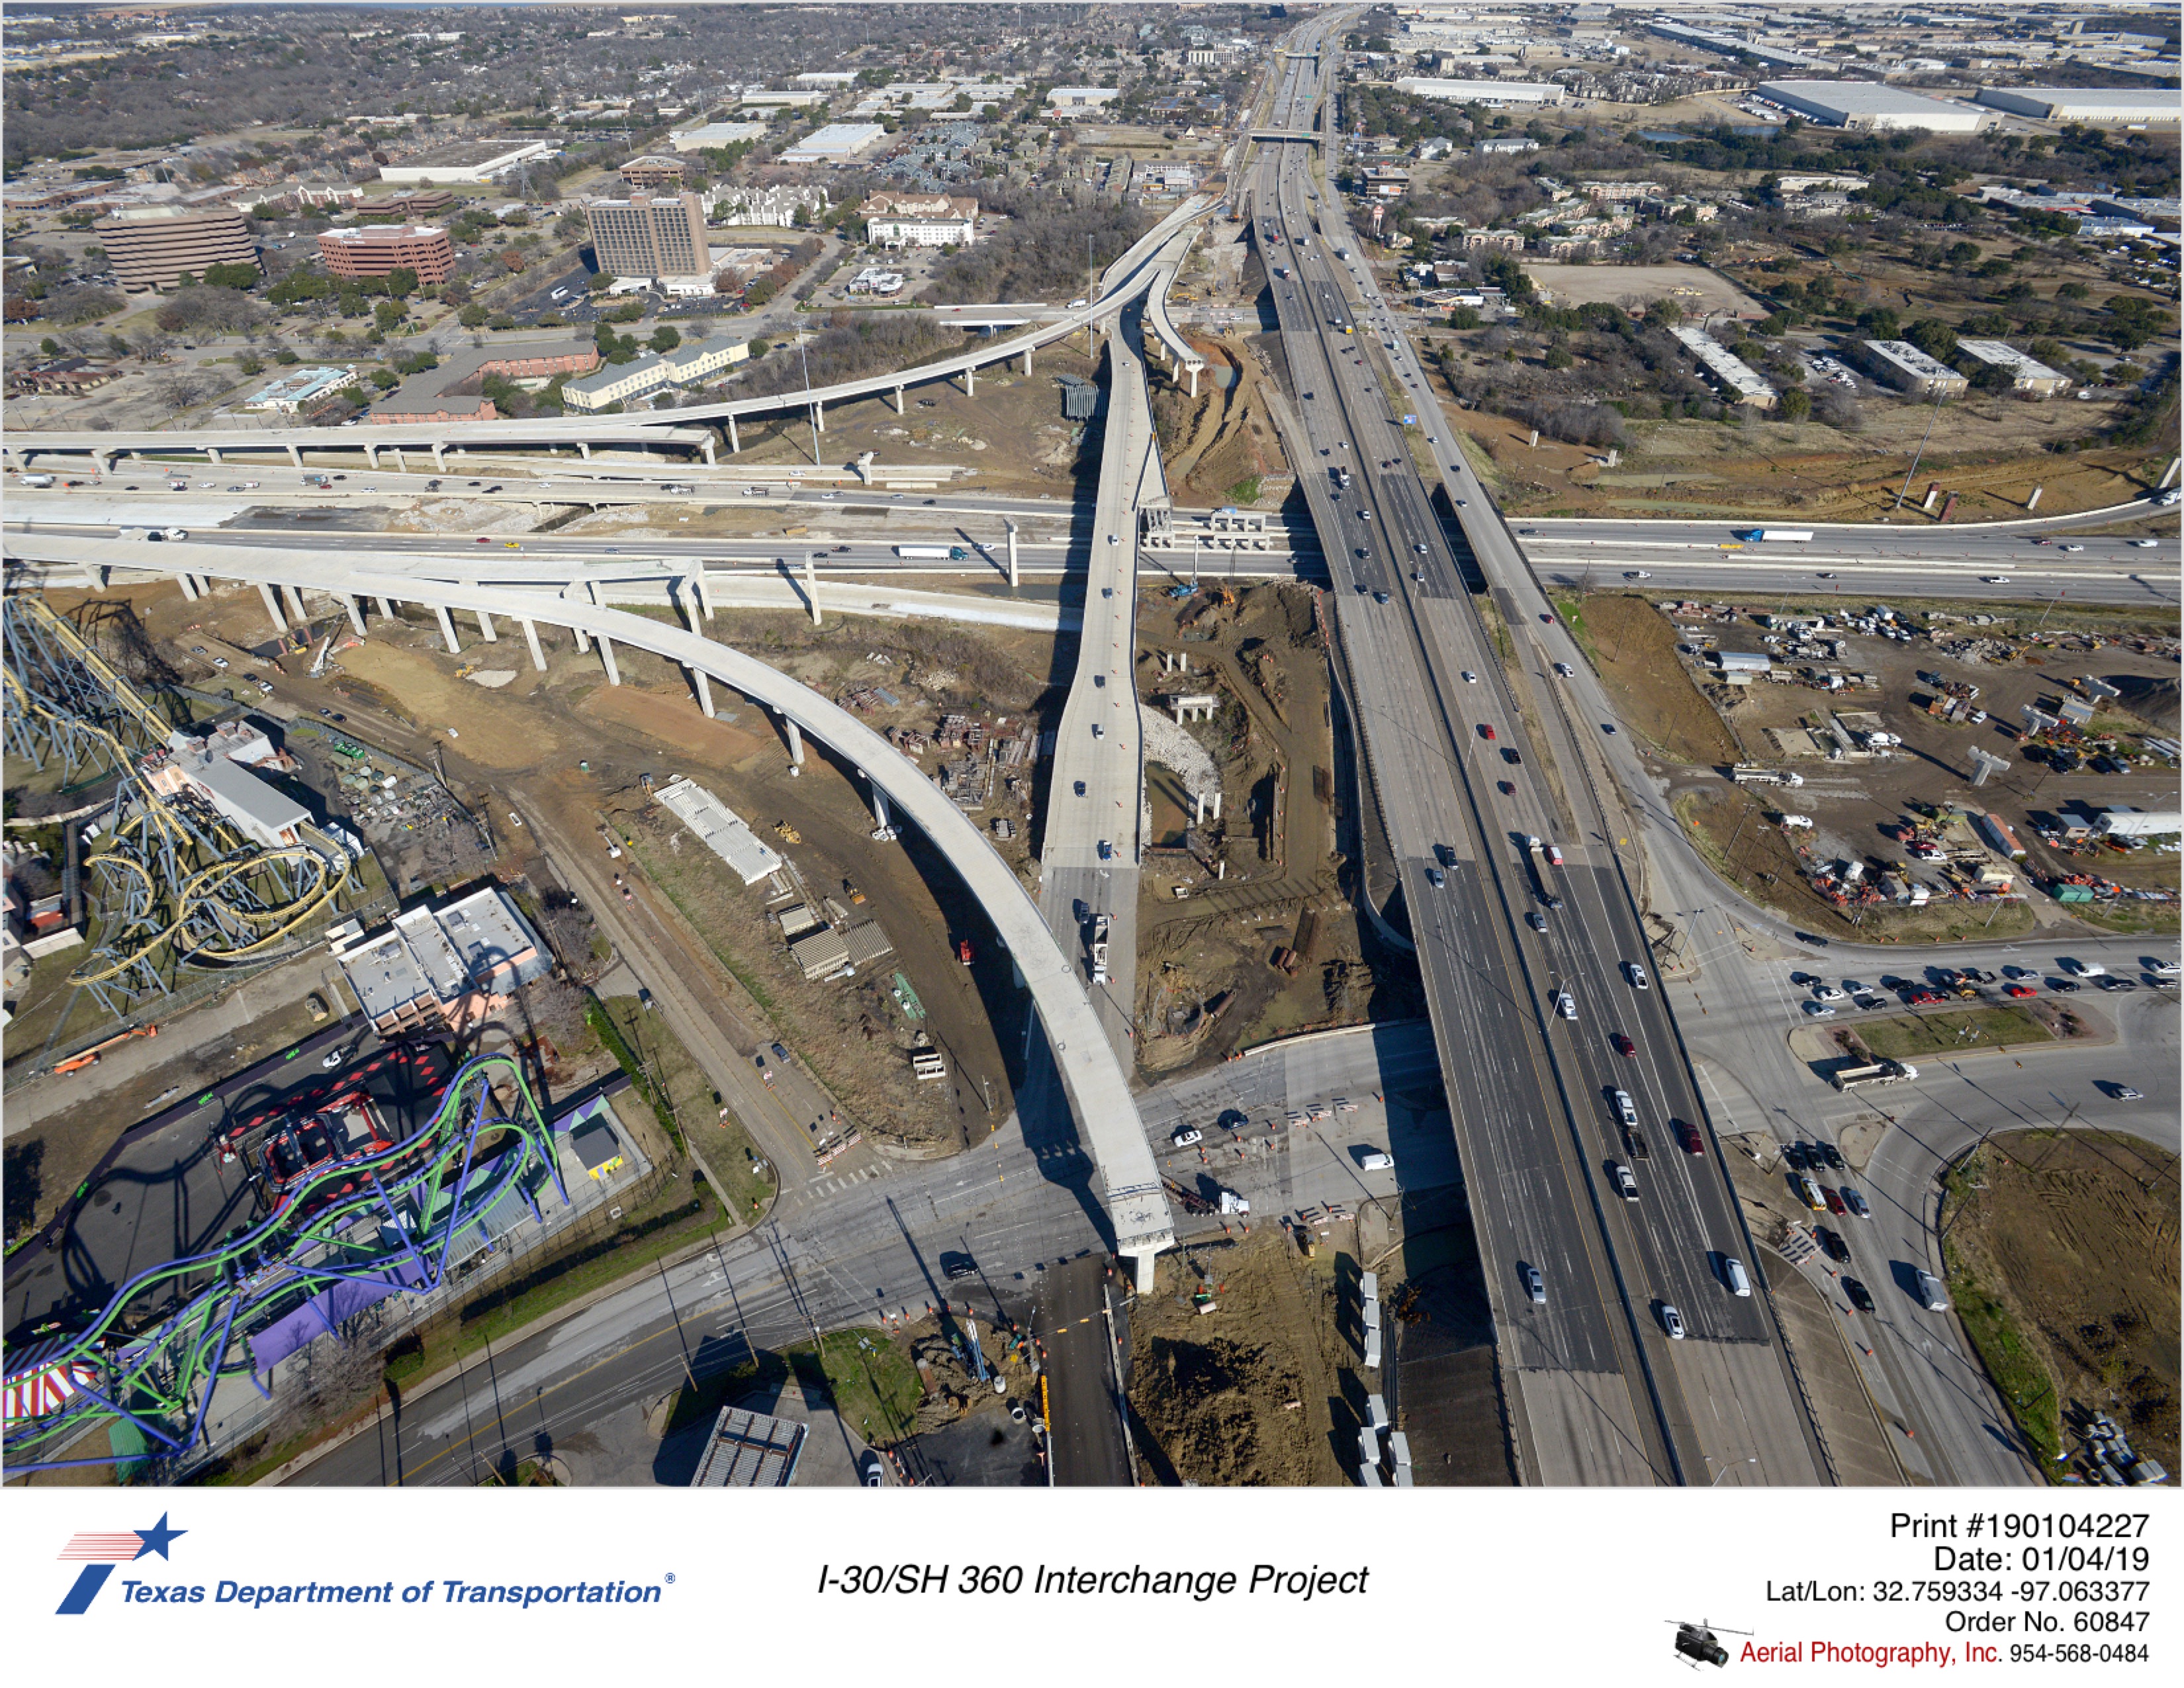 I-30/SH 360 interchange looking north with Six Flags Dr in foreground